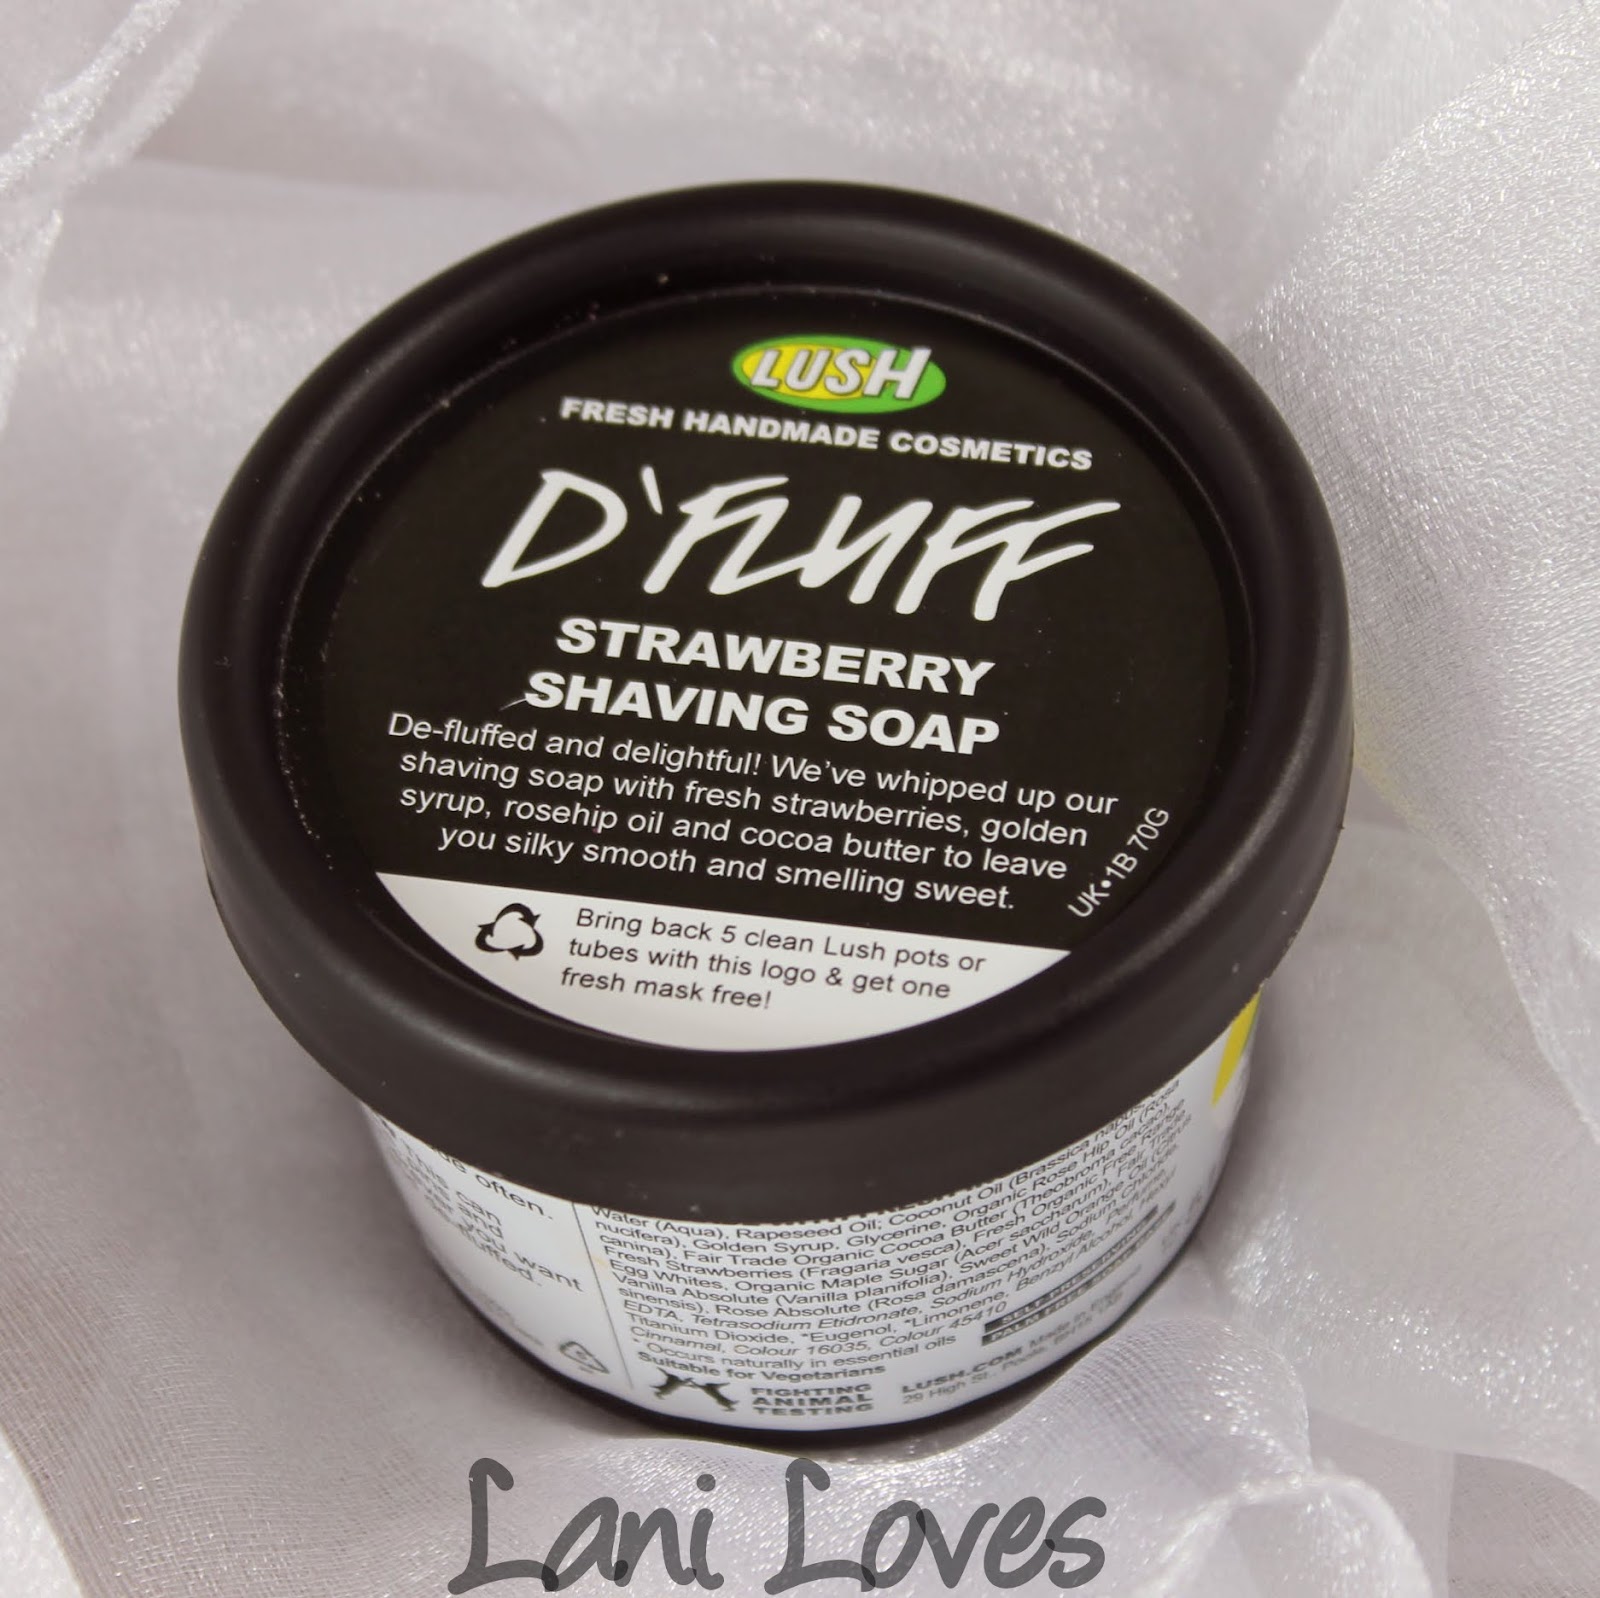 LUSH D'Fluff Strawberry Shaving Soap Review & Giveaway!